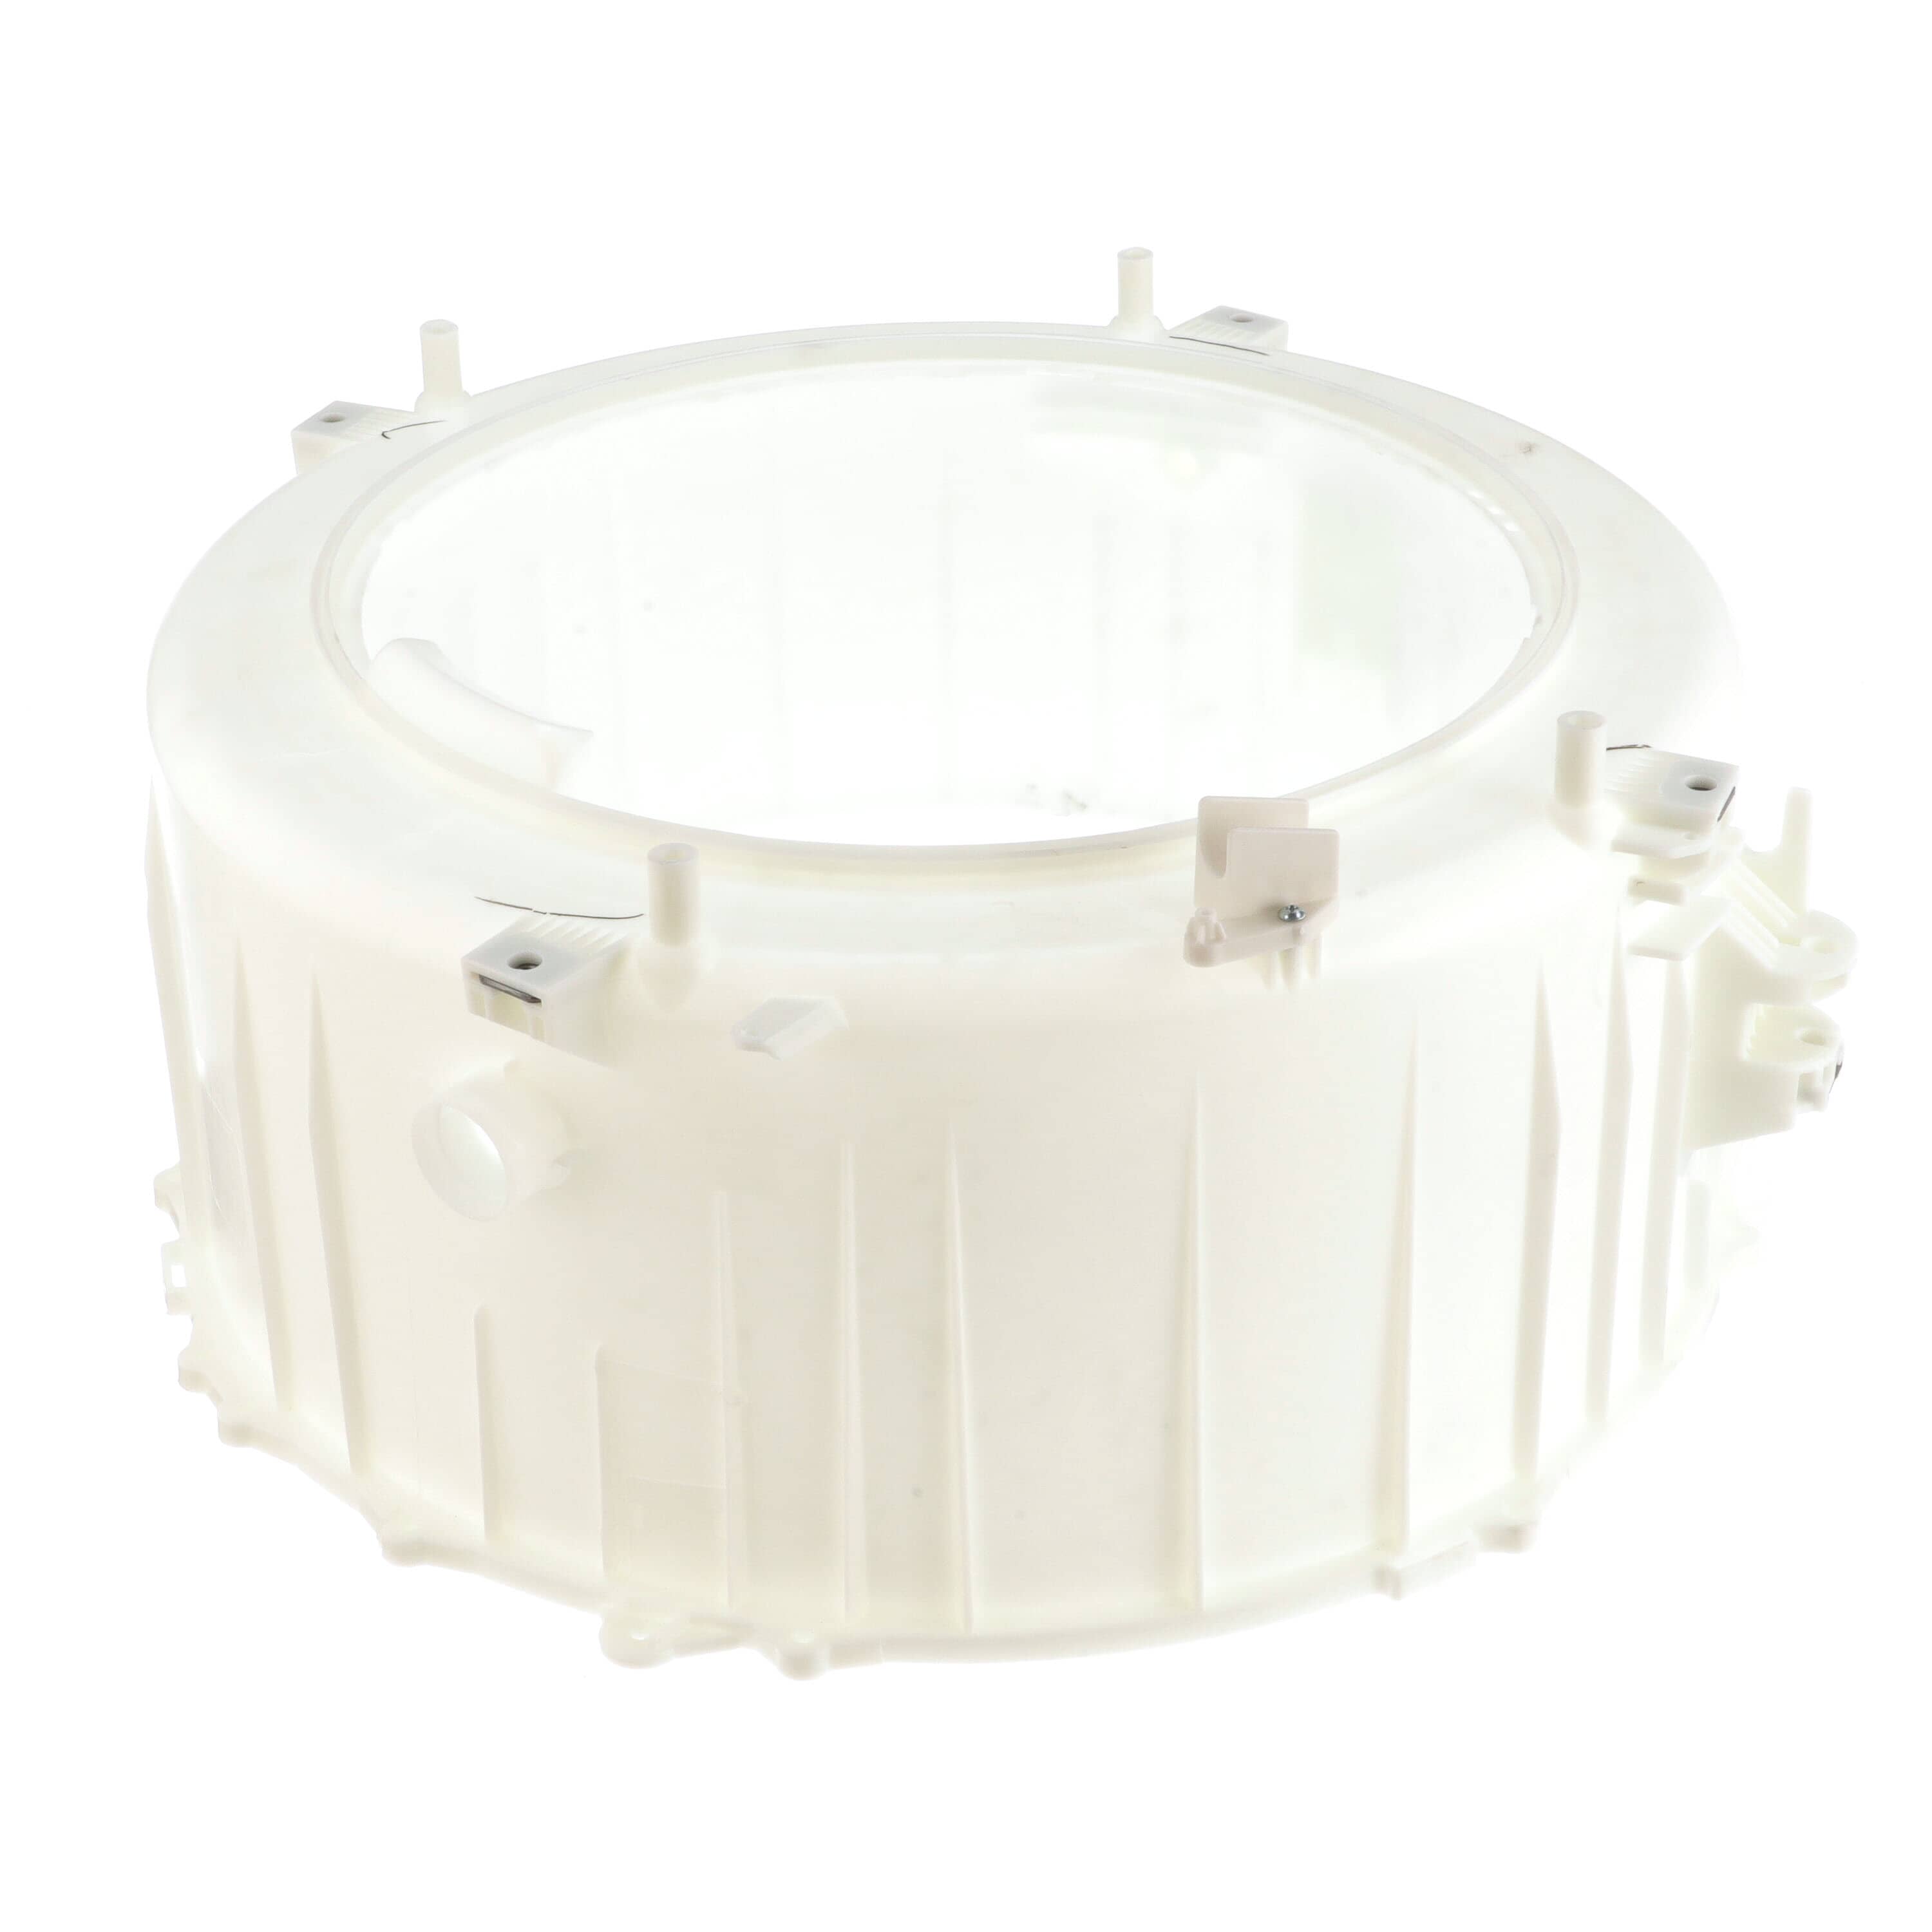 Samsung DC97-15596A Washer Front Outer Tub Assembly | Samsung Parts